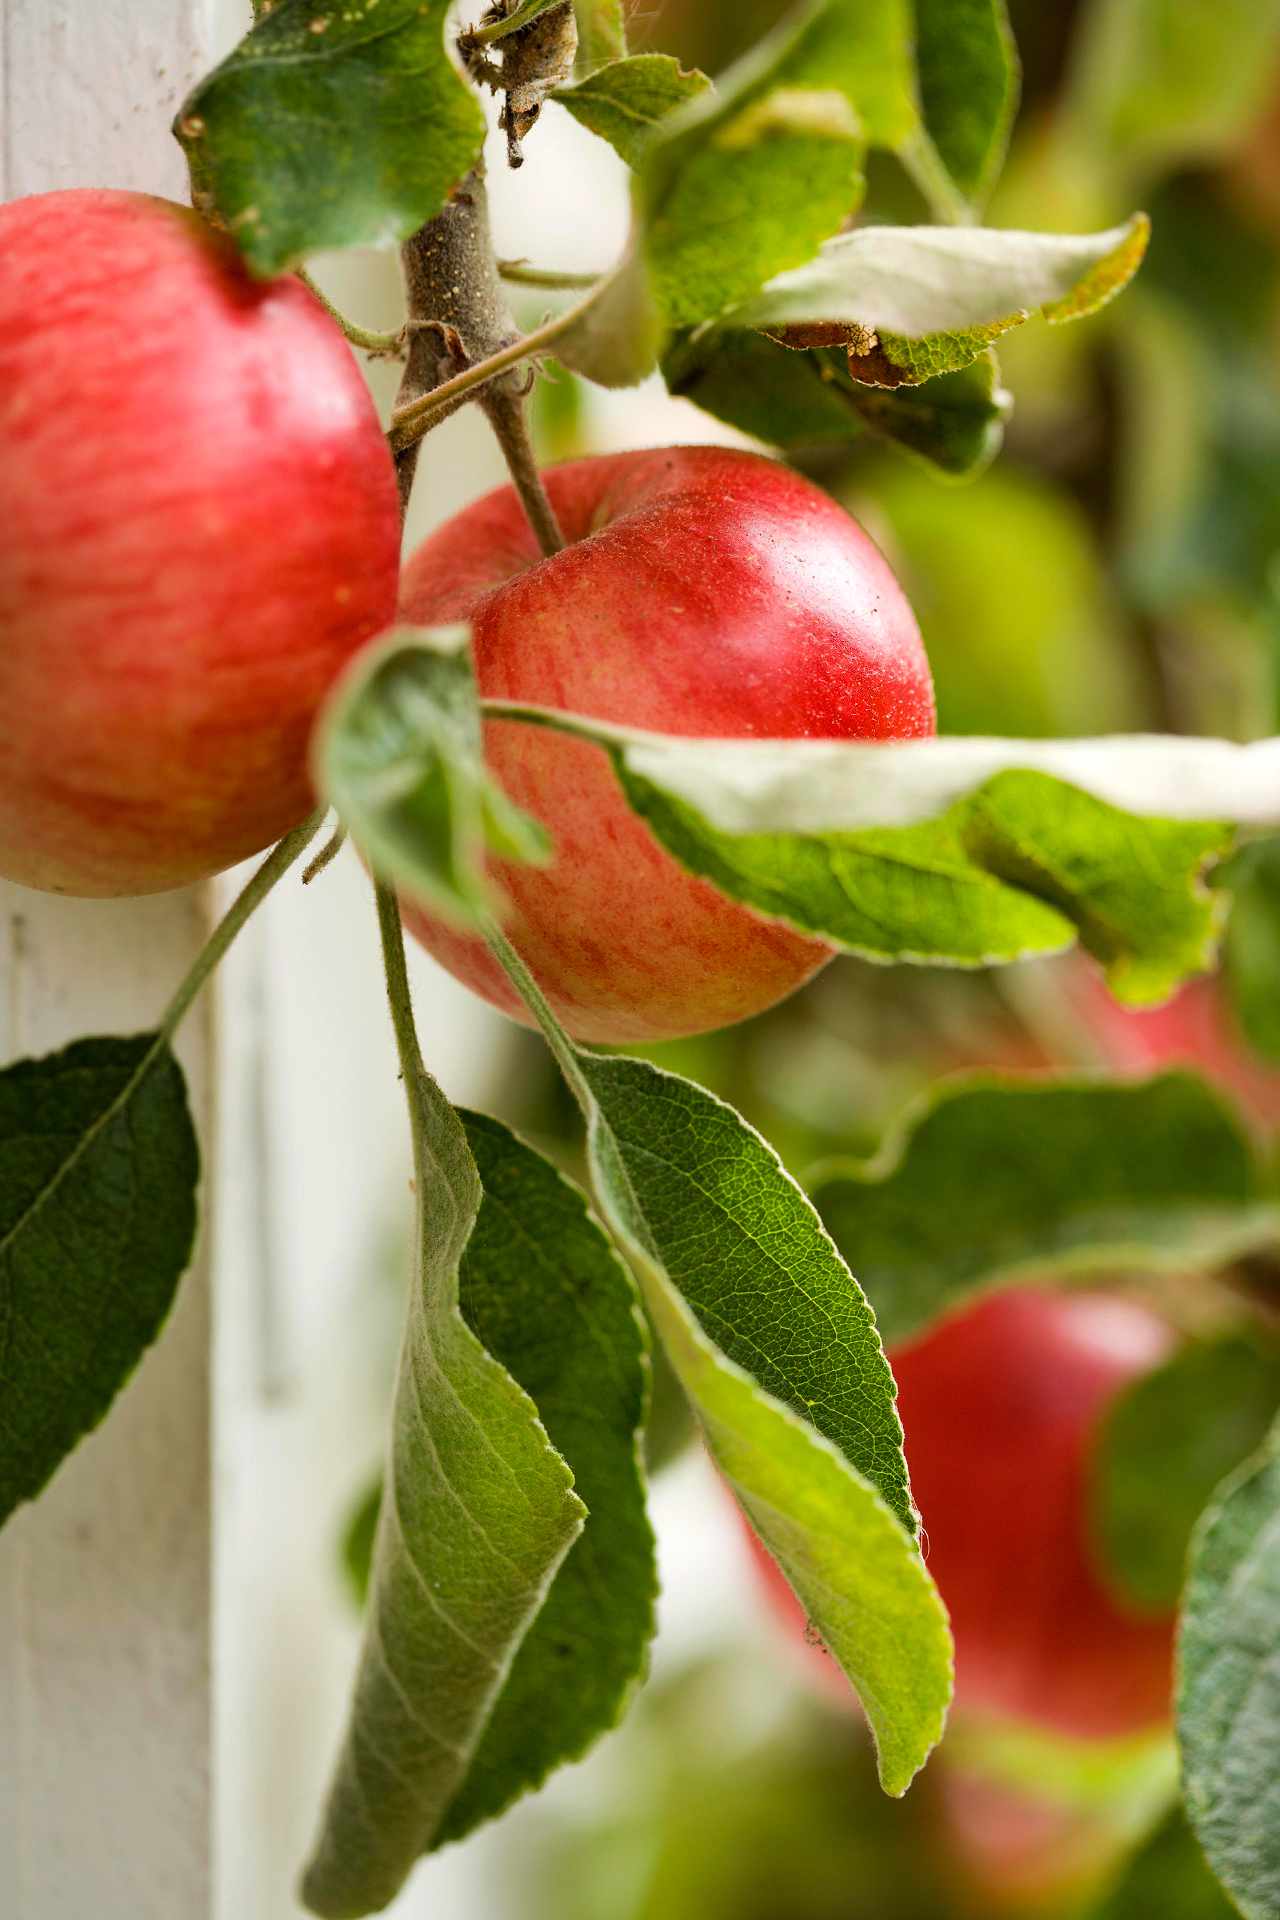 red ripened apples on tree branch